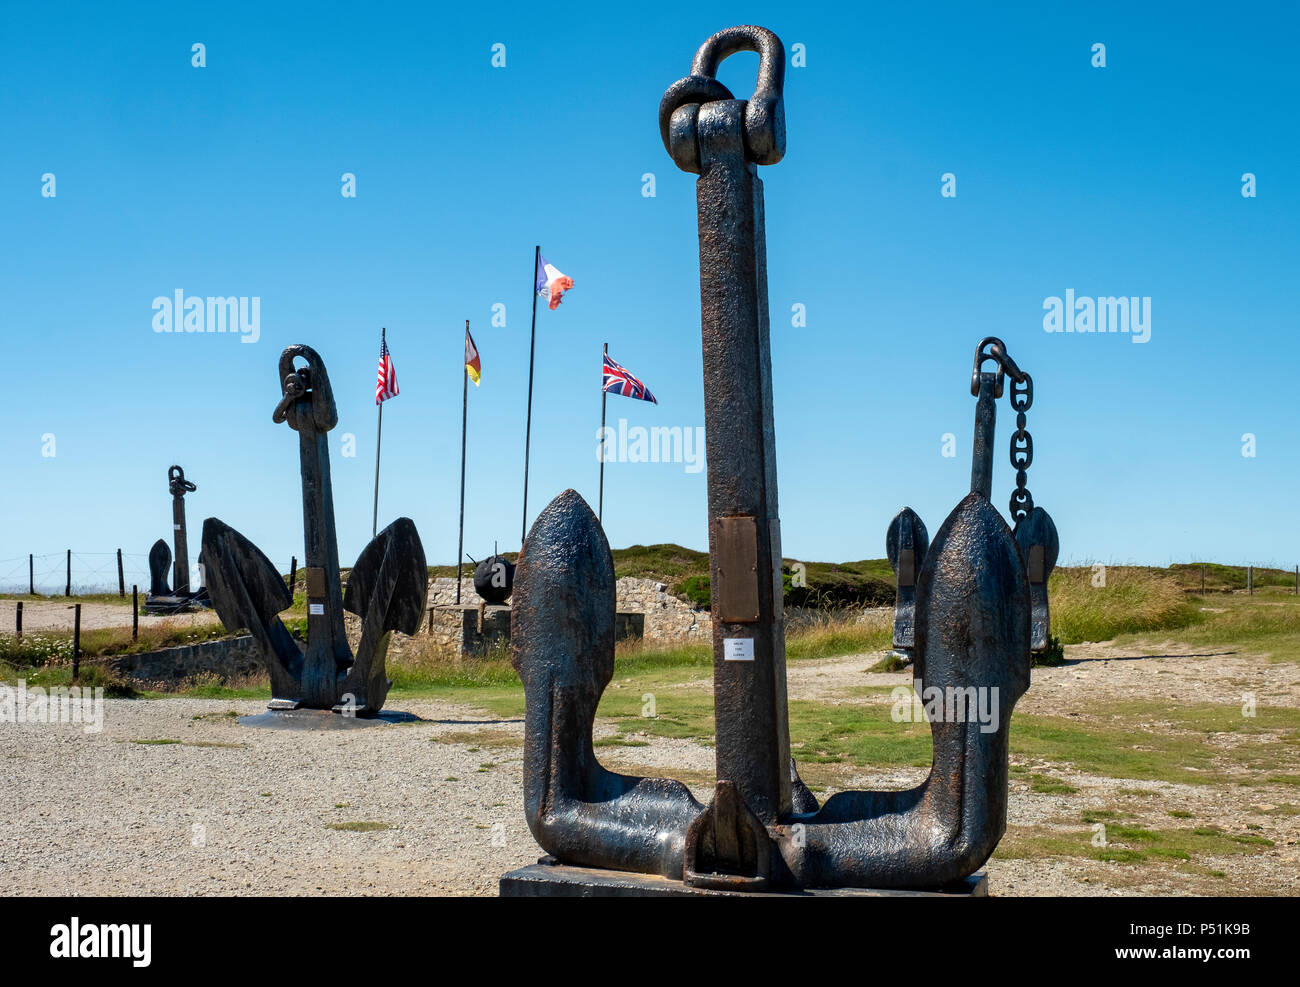 Anchors at Mémorial Merchant Navy museum, homage to 45,000 Allied merchant navy sailors during WW2, Pen-Hir, Brittany, France Stock Photo